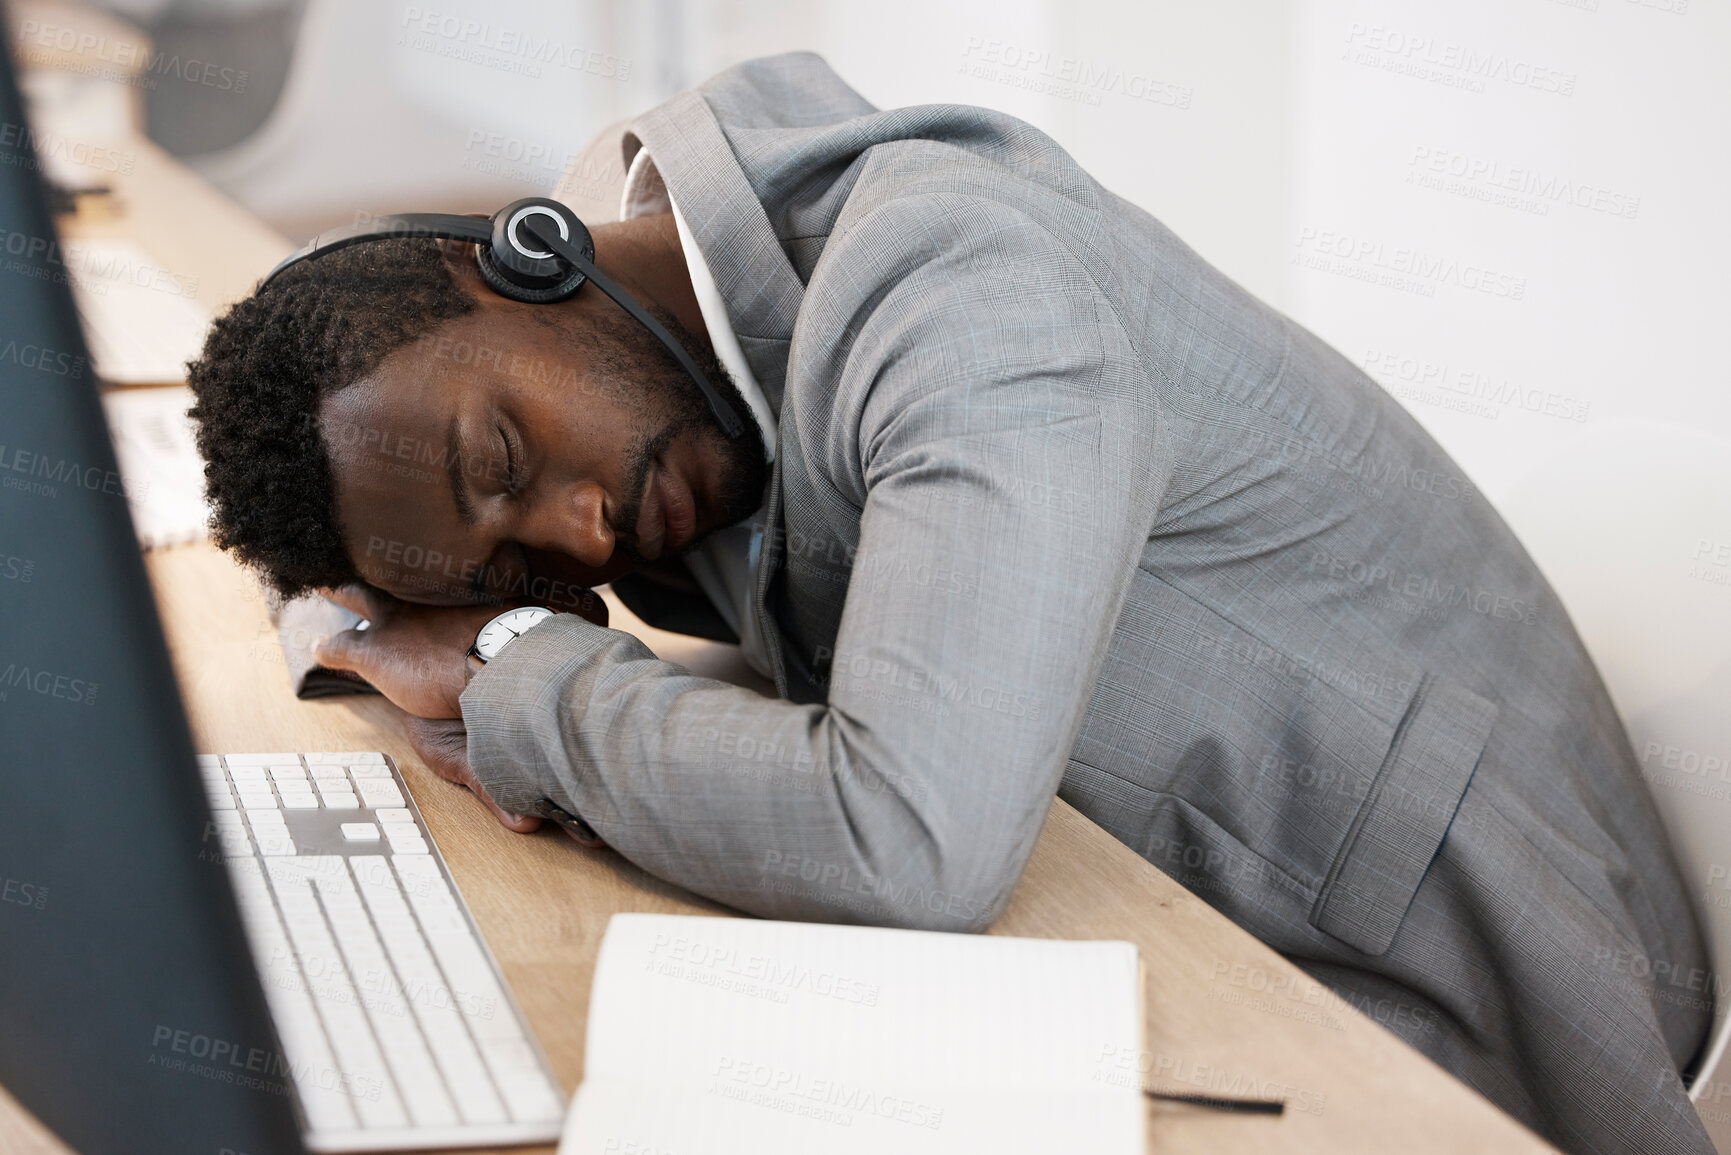 Buy stock photo Tired CRM call center agent sleeping on computer desk at work office with headset on. Exhausted young business man taking a nap on table. African American male feeling burnout resting in workplace.